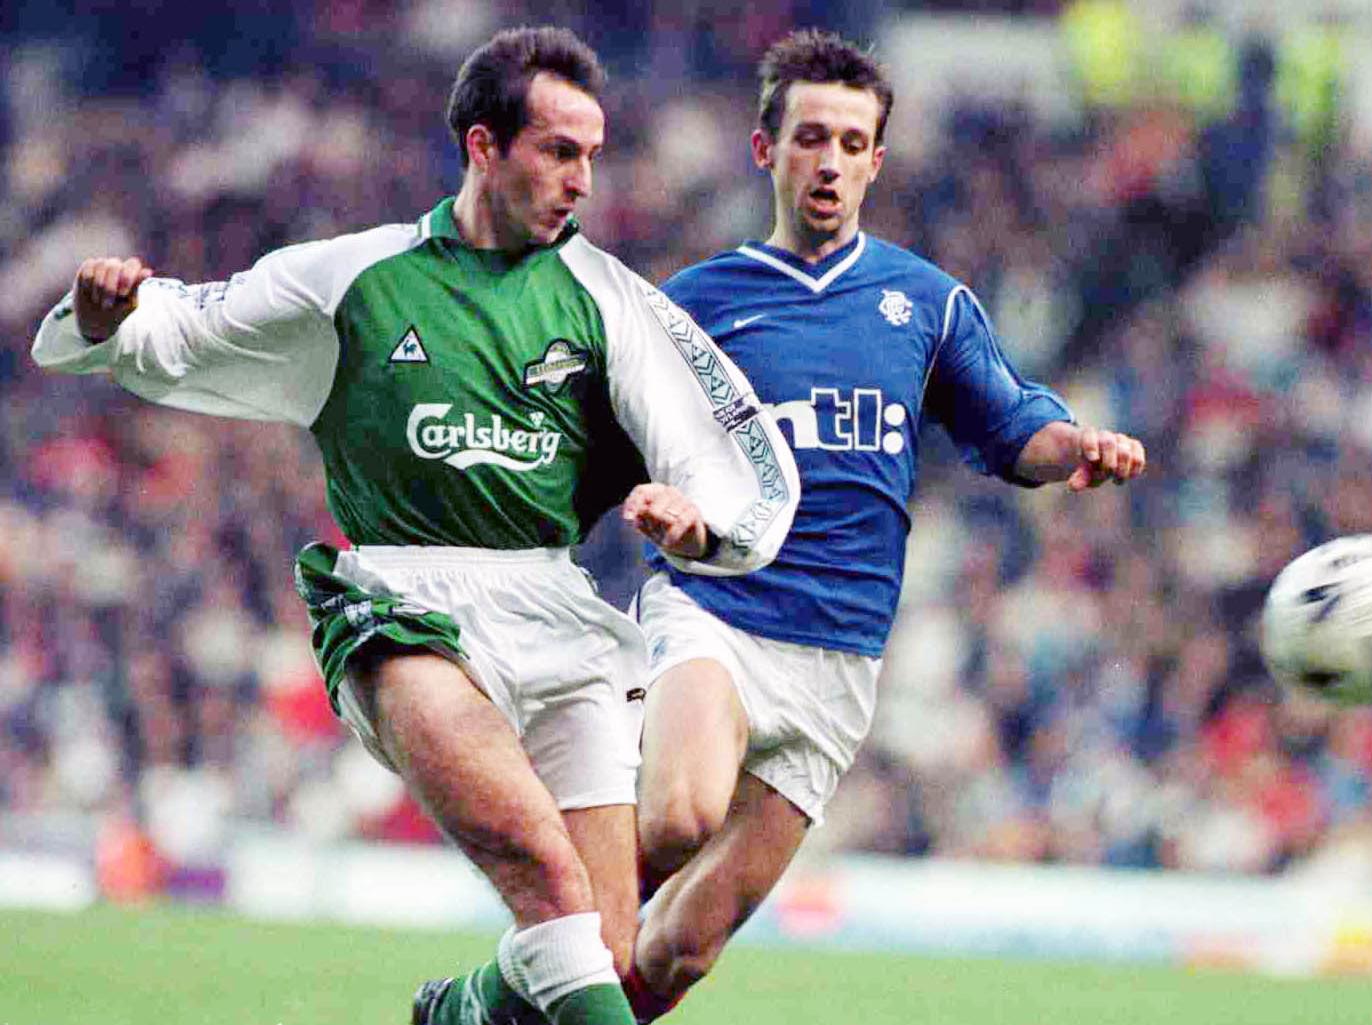 Collins left Hibs in 2001 to sign for Morton, where would go on to become assistant manager. He is now working in an estate agency franchise, right through from building to selling properties.